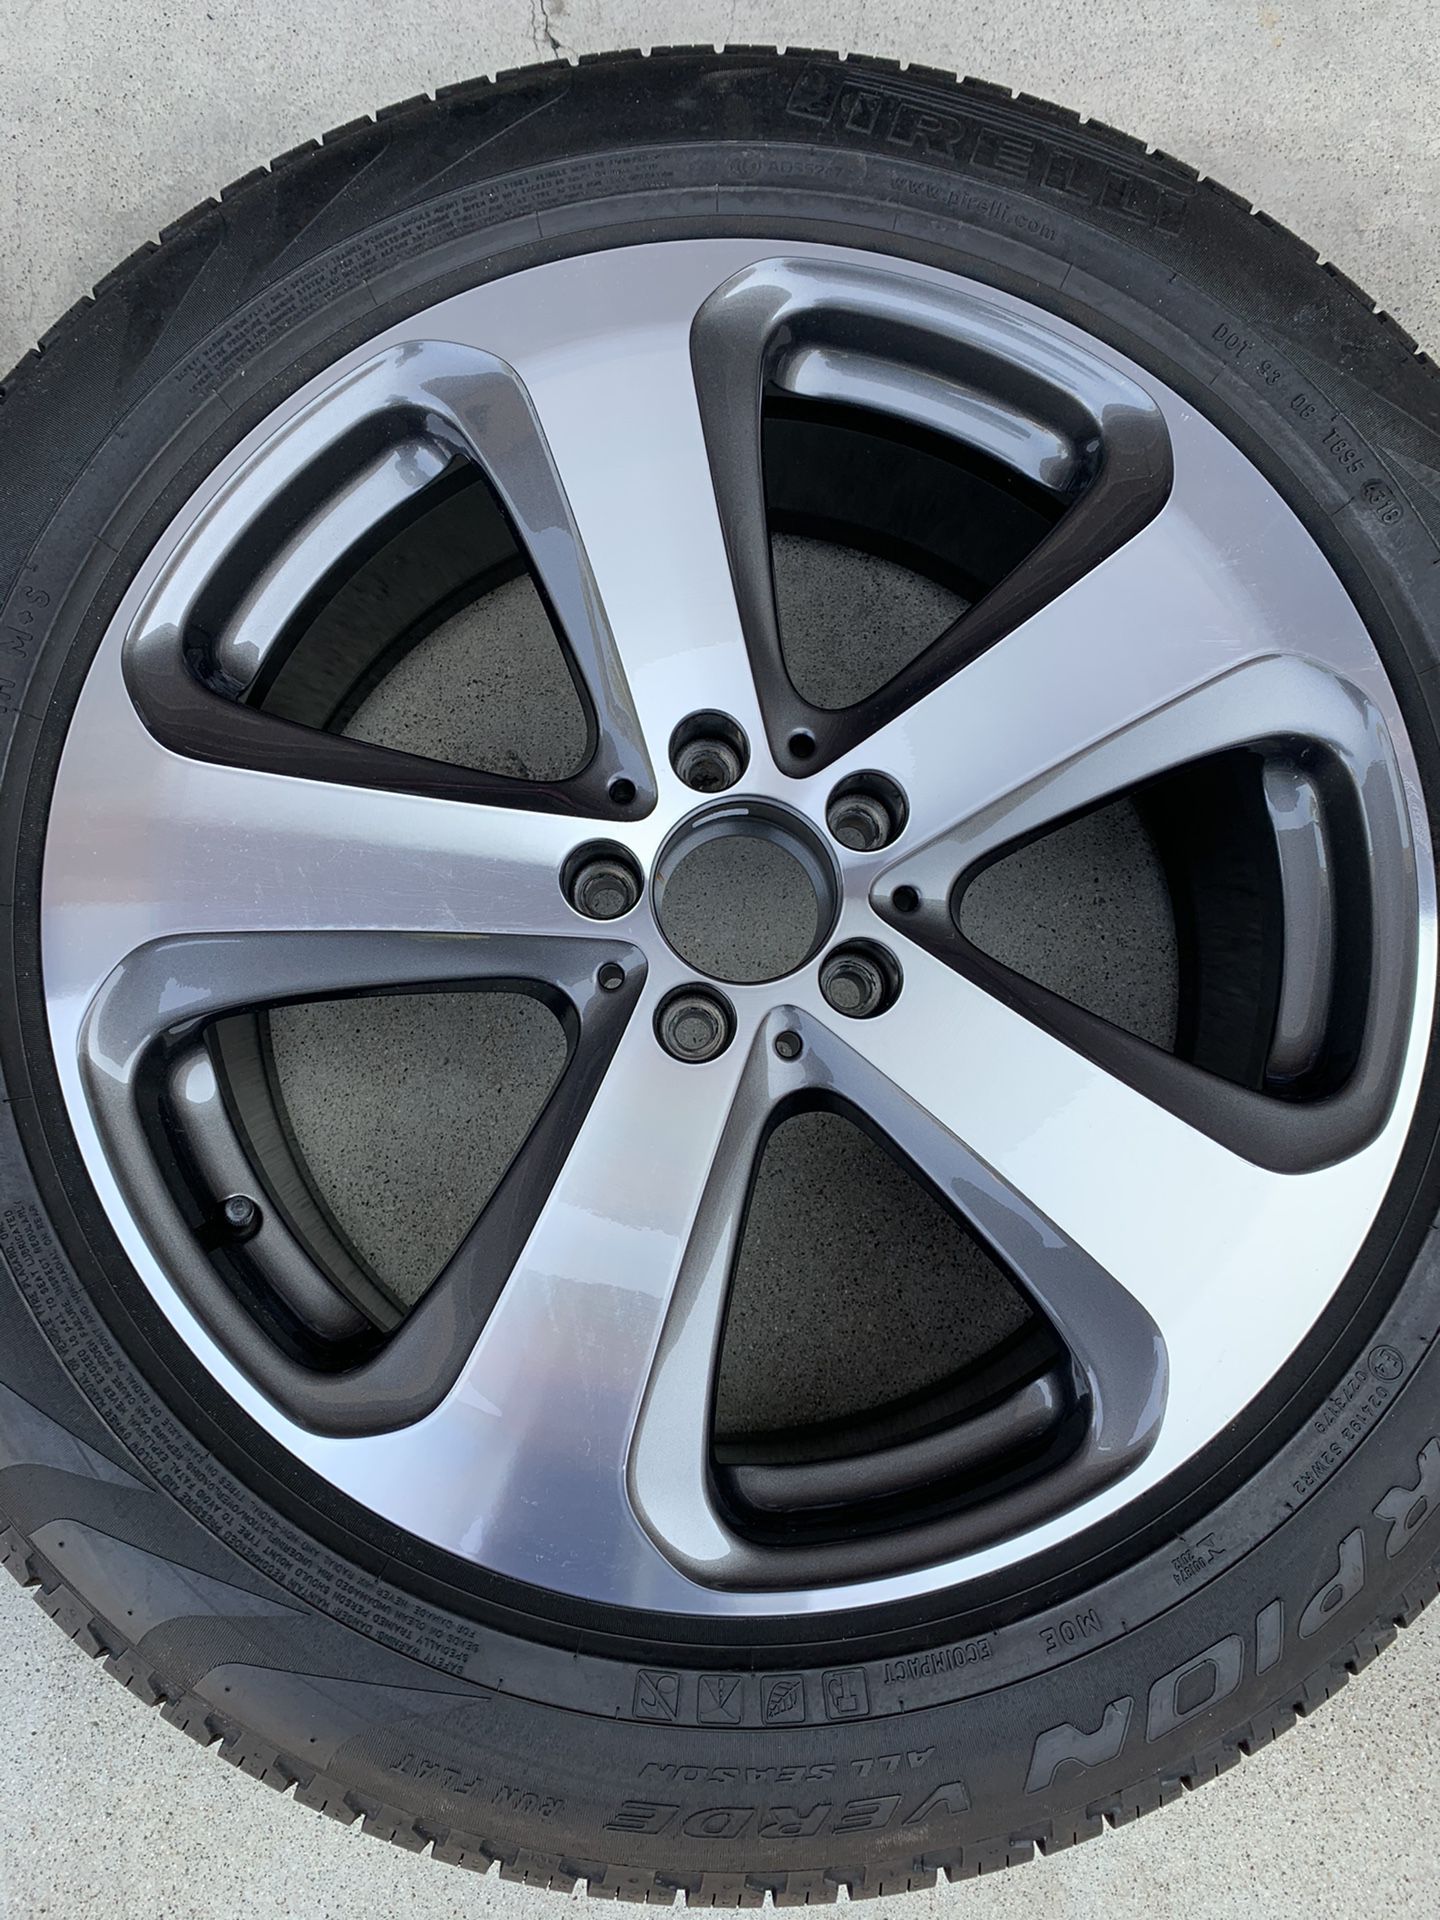 Mercedes-Benz 19 inch rims and tires